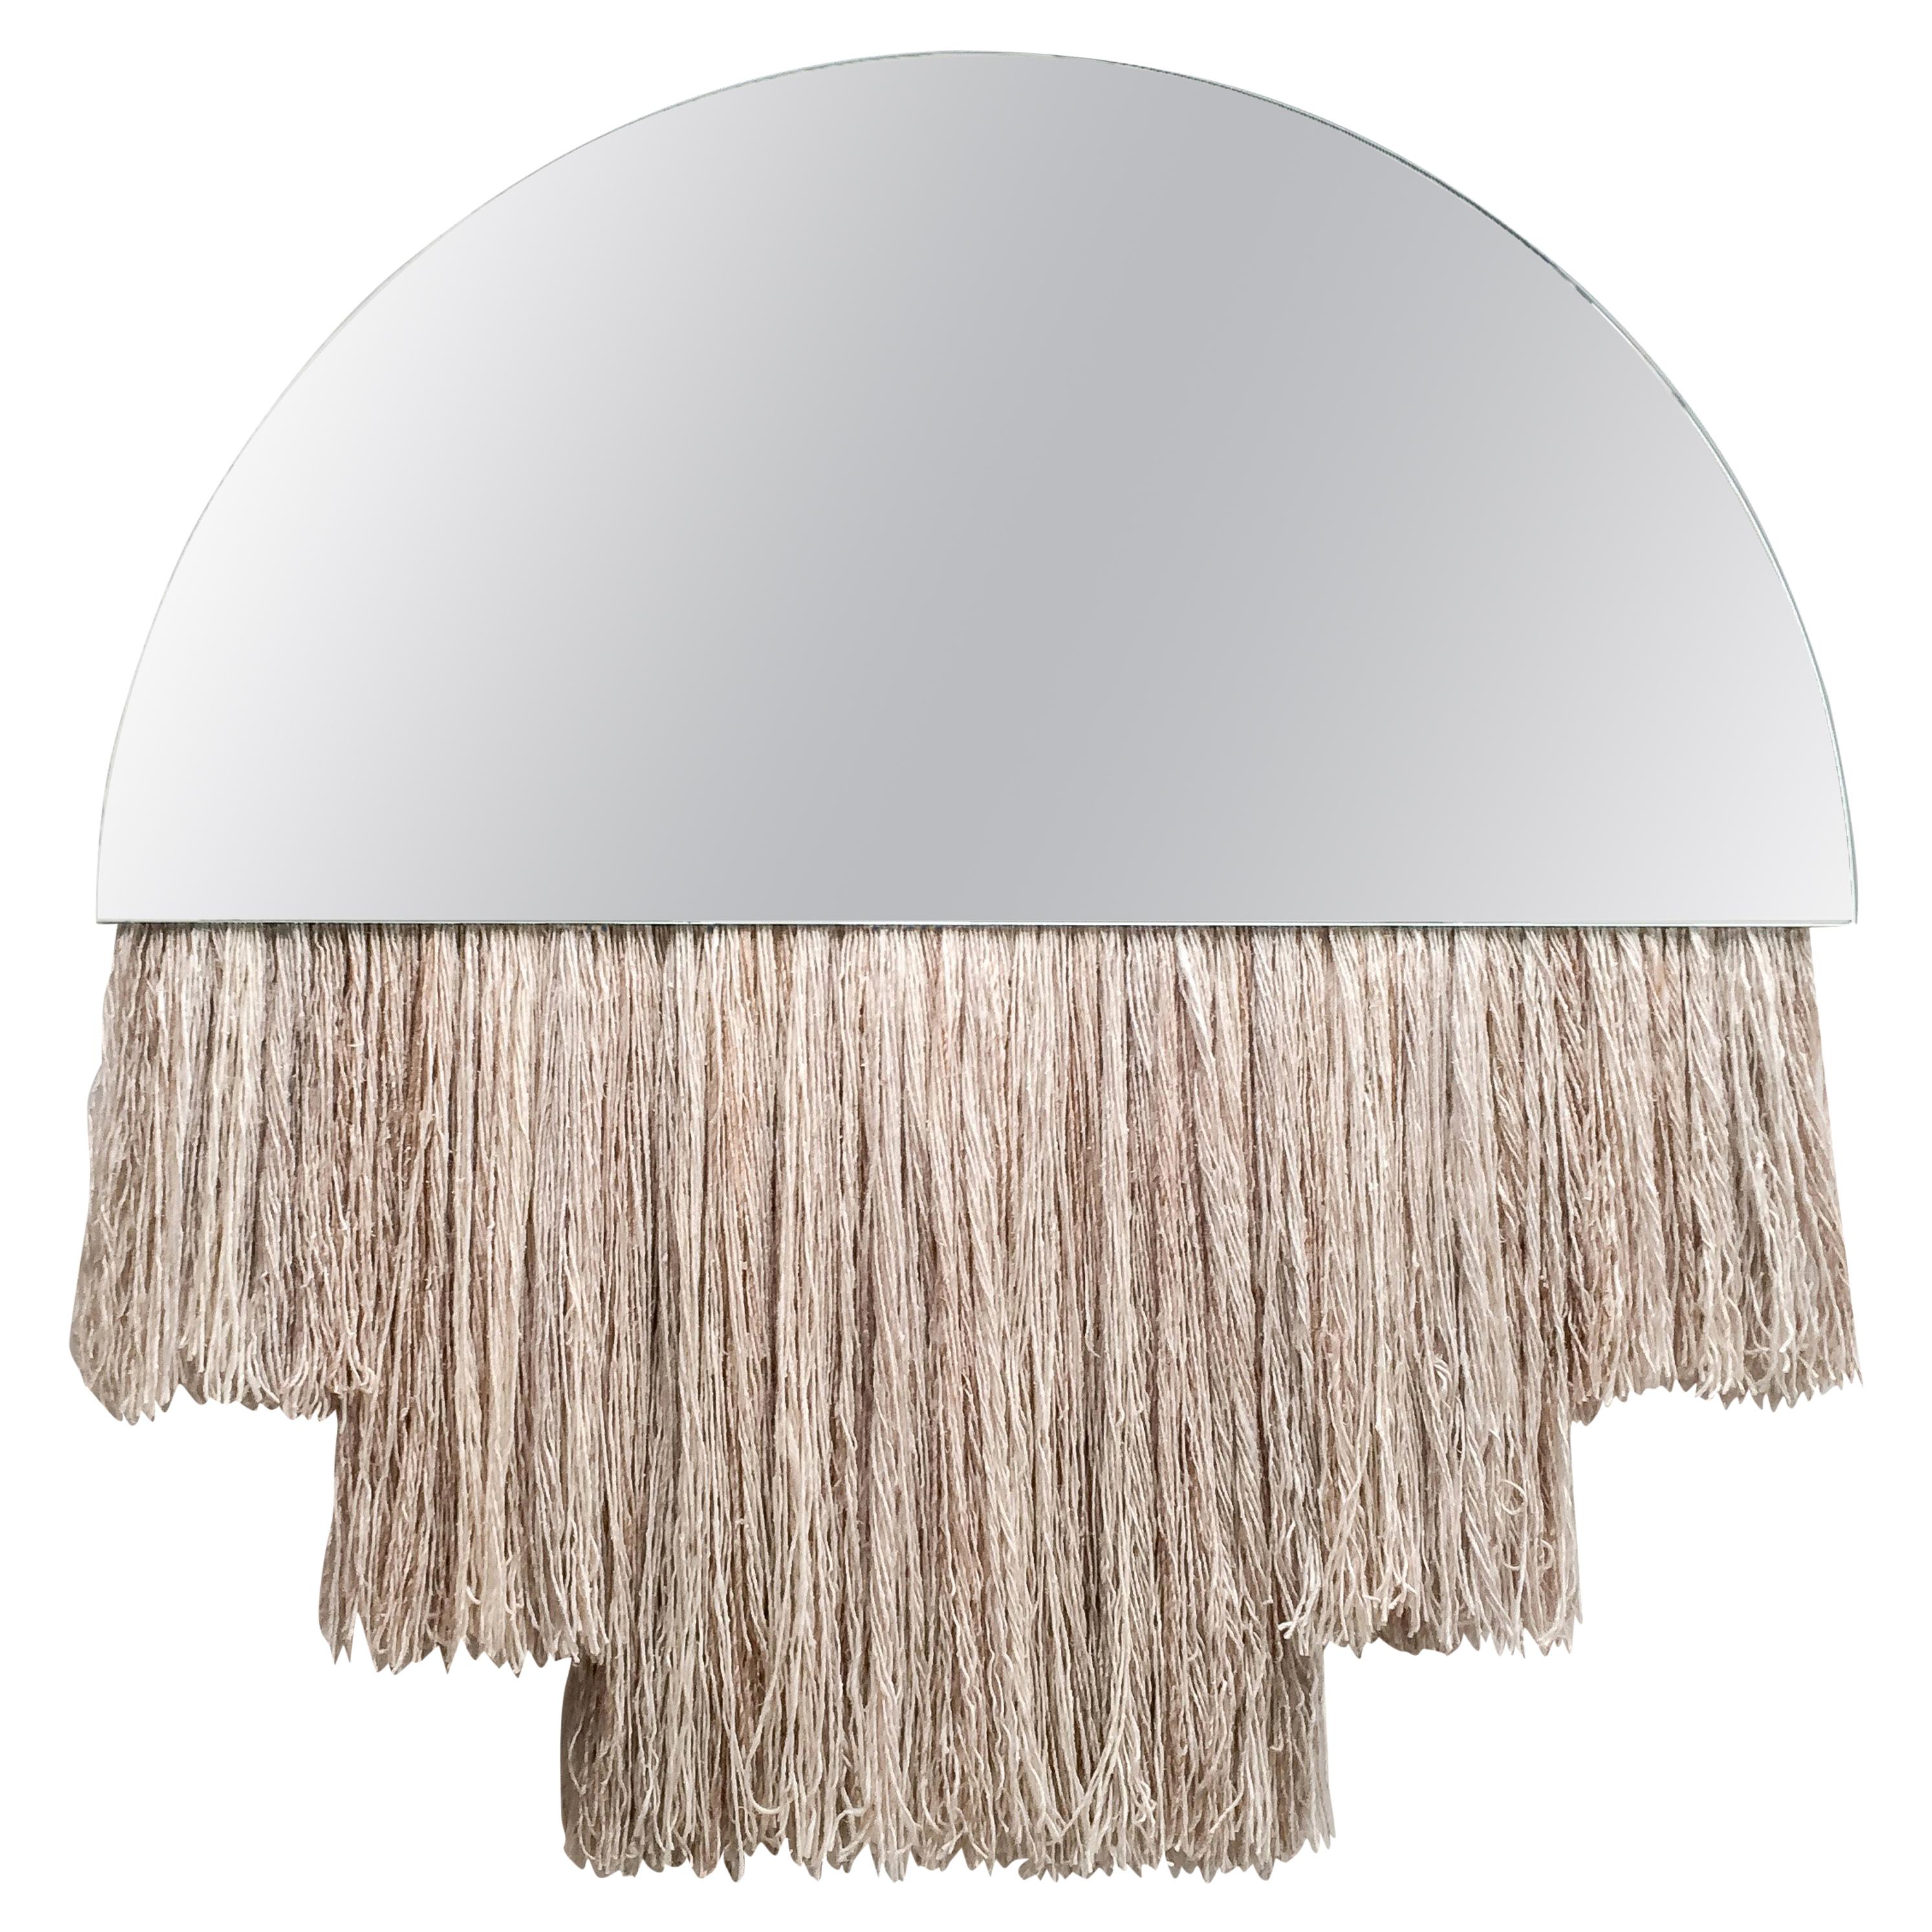 Large Clear Mirror with Fiber, Contemporary Half Moon Mirror by Ben & Aja Blanc